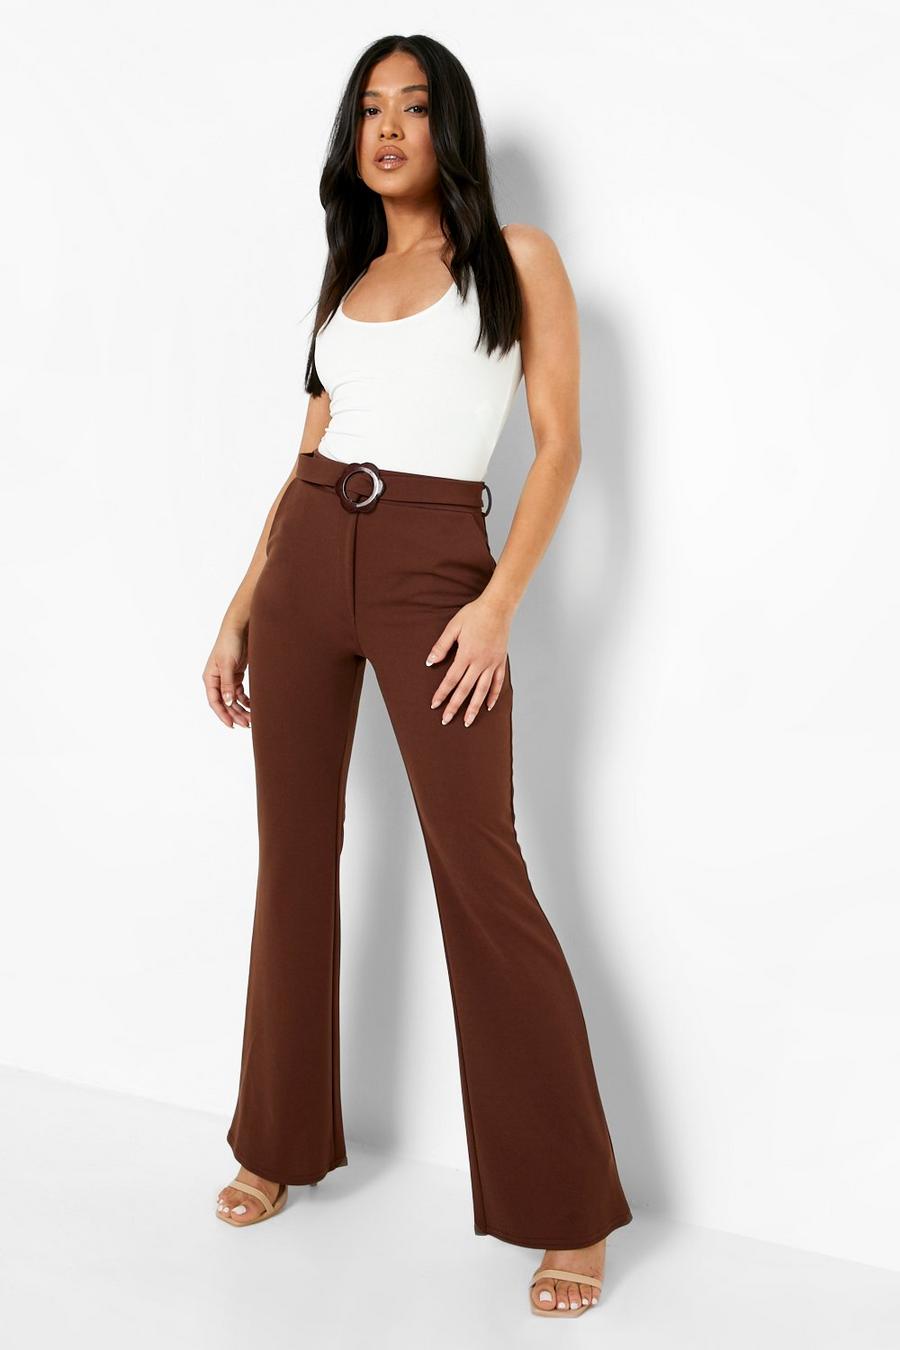 Chocolate Petite Daisy Buckle Belted Flare Trouser 